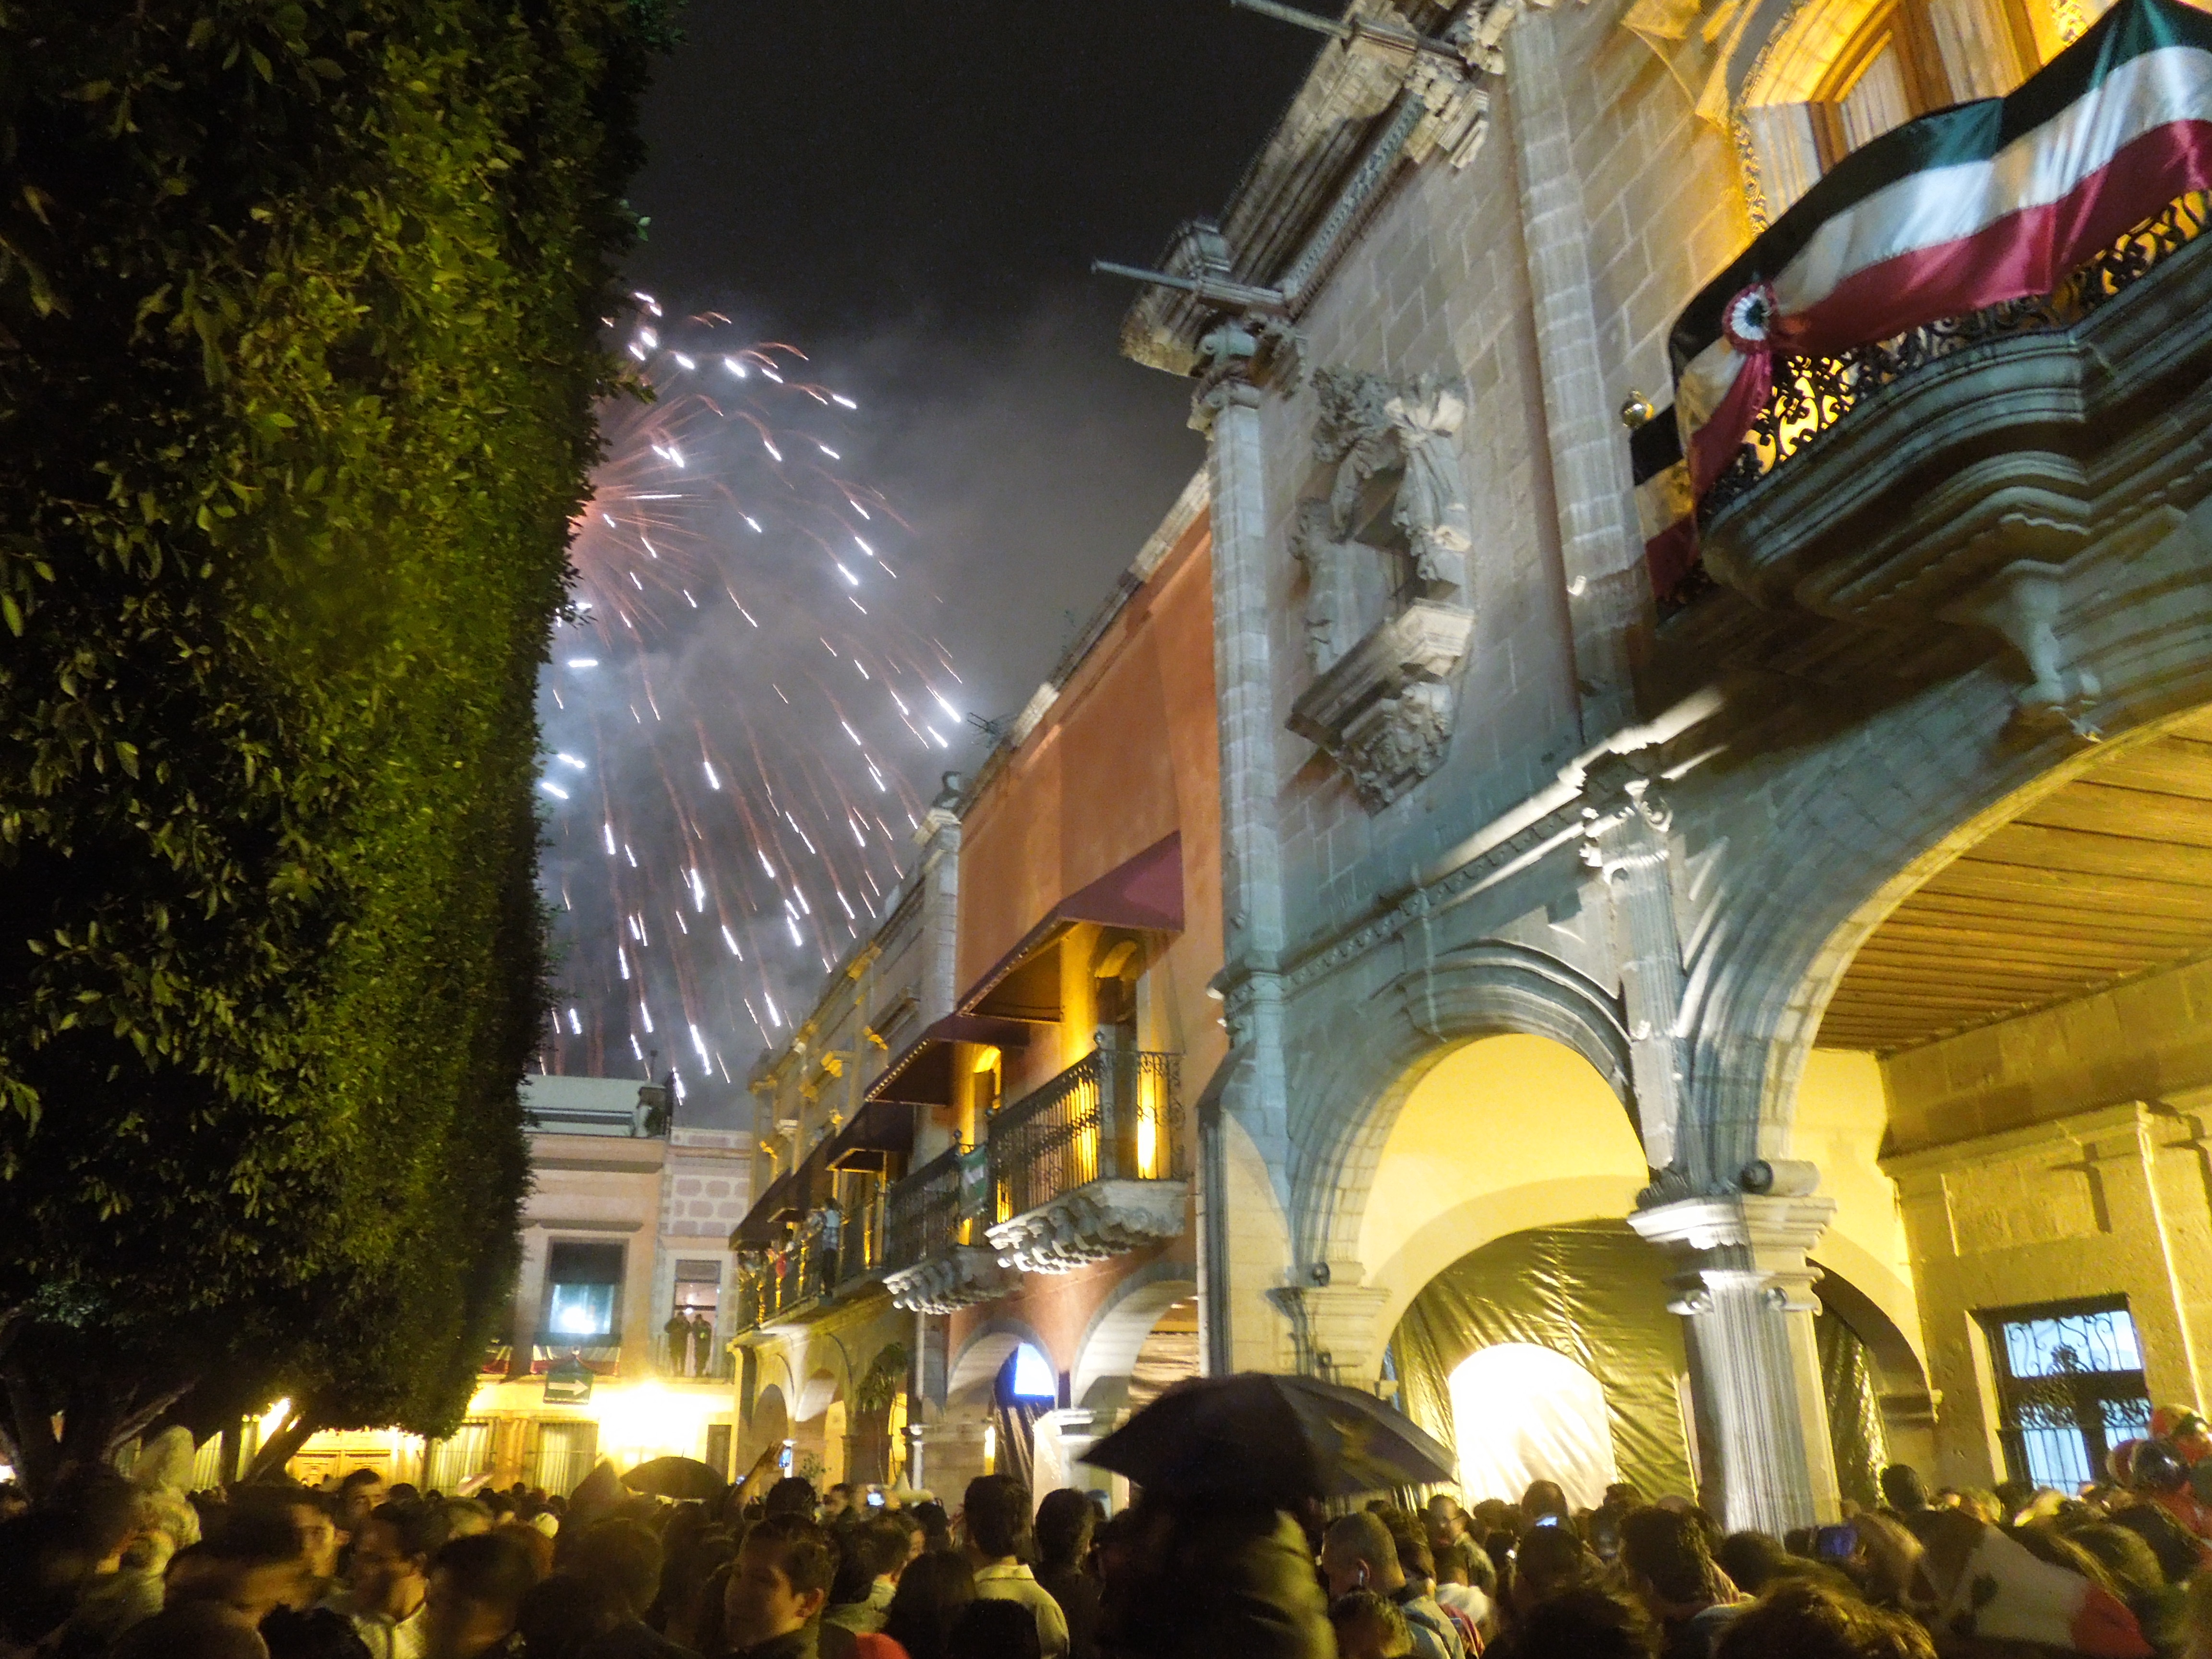 Fireworks explode over the Plaza de Armas in Querétaro just moments after the Grito. The fireworks can be seen in the open sky between trees on the left and government buildings adorned with Mexican colors on the right.